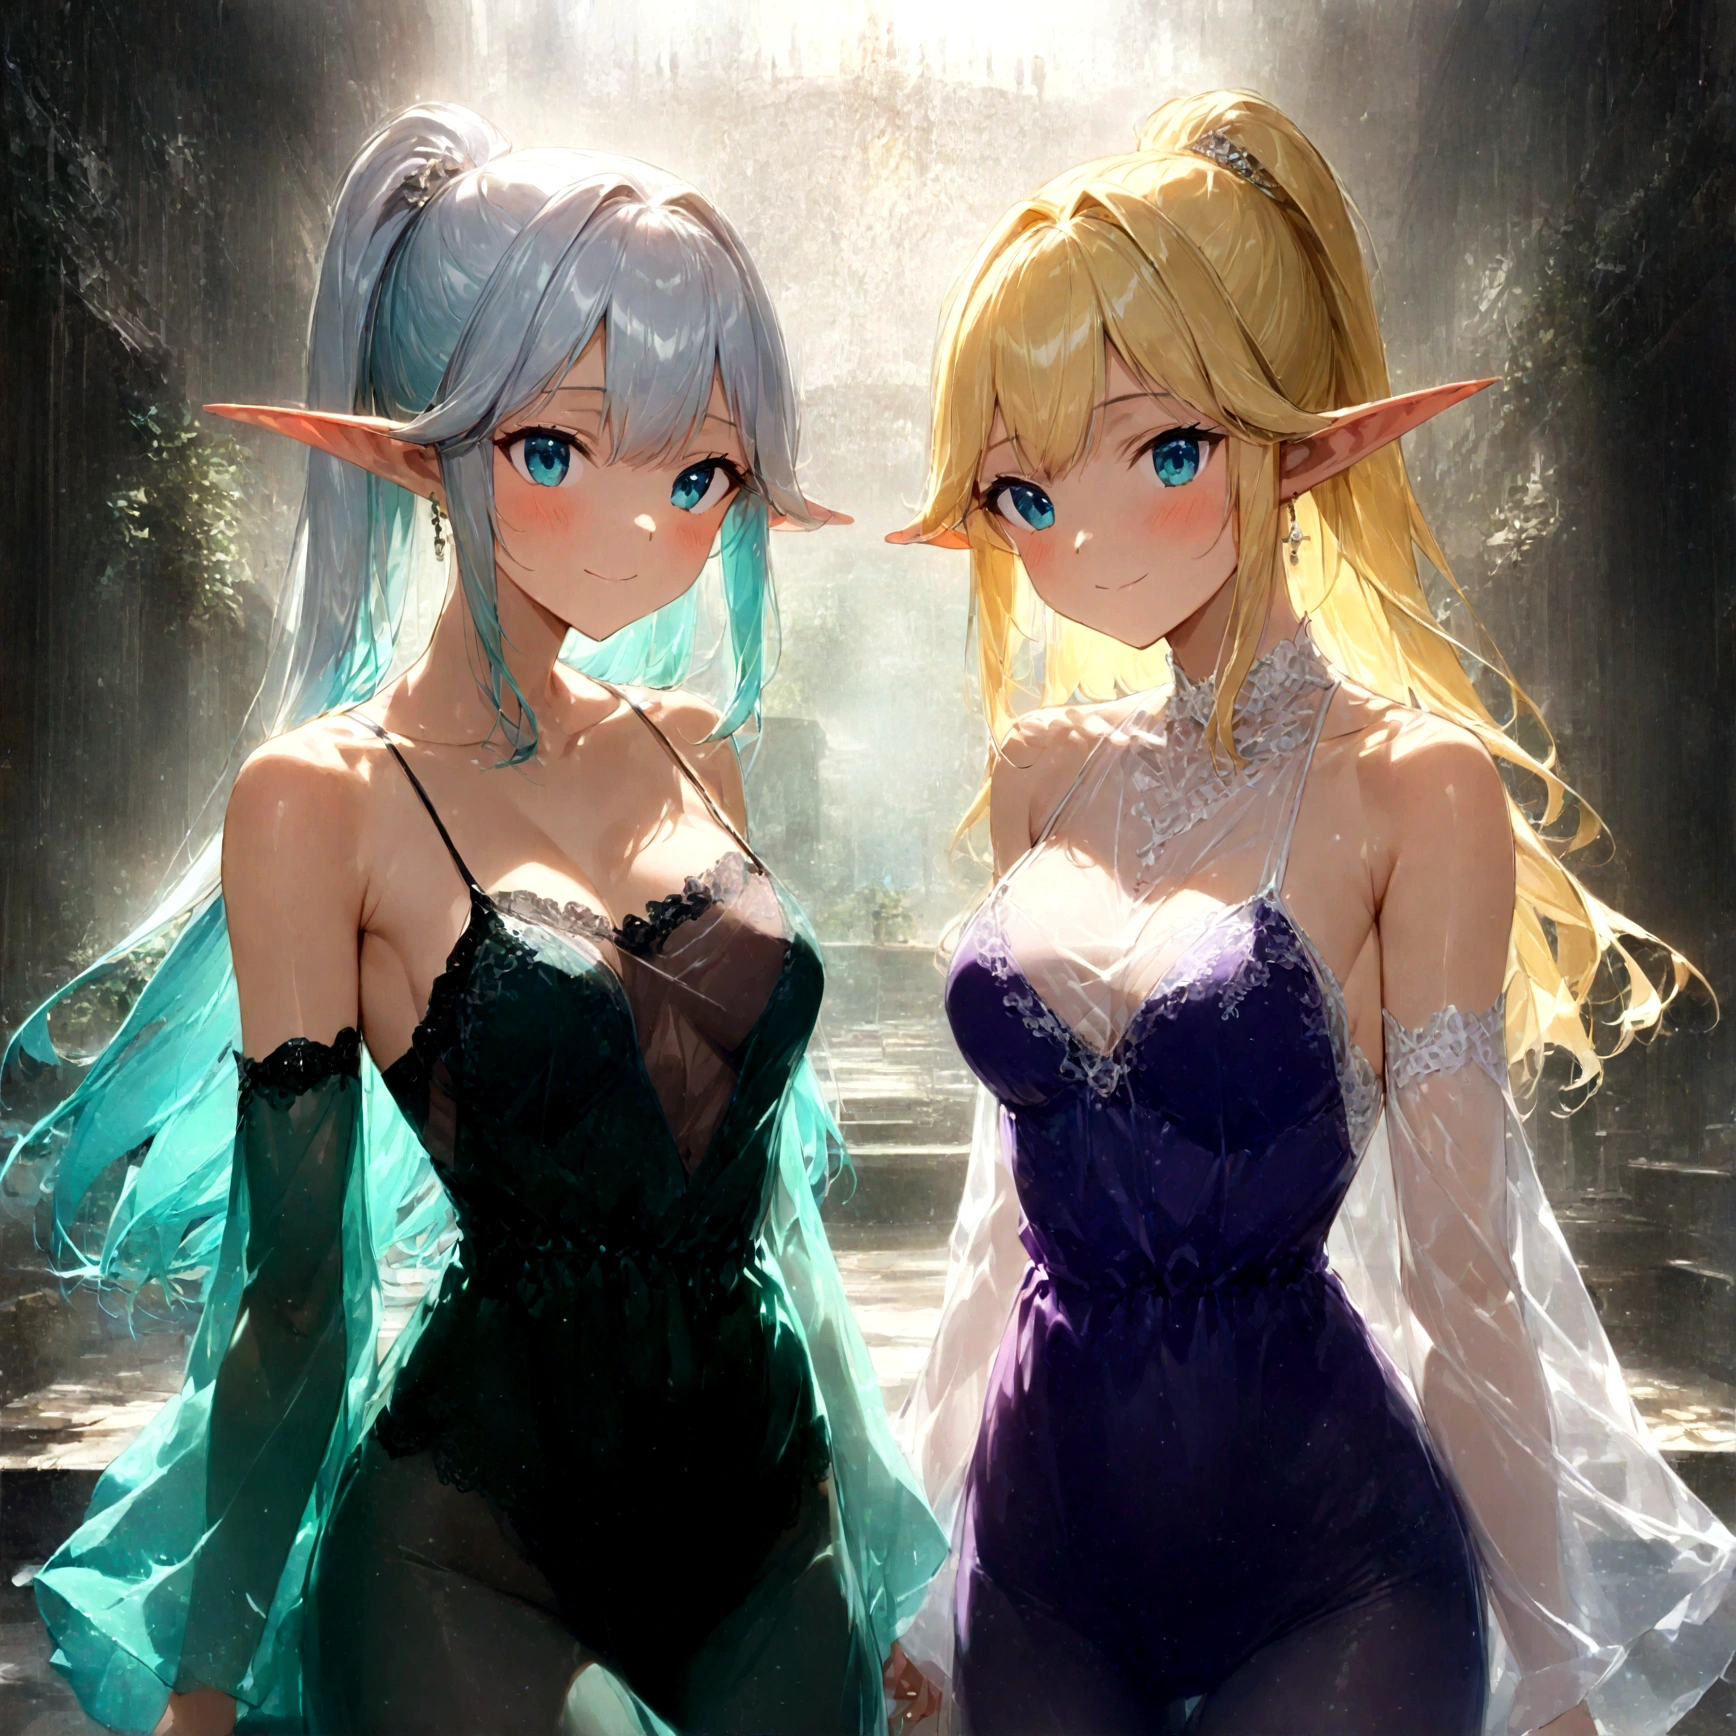 (masutepiece:1.2), (Best Quality:1.2), (high resolution:1.2), (perfect anatomy:1.2), (Do not split view:1.2), (See-through camisole:1.5), 
(2beautiful elven girls:1.5), (the most beautiful elf girl in the world and a beautiful dark elf girl:1.0), (a blonde haired blue eyed elf girl and a silver haired blue eyed dark skinned dark elf girl:1.0), 
(Fluttering smile:1.0), (Purple camisole dress:1.0), (Excessive amount of lace and jewelry on camisole dress:1.0), 